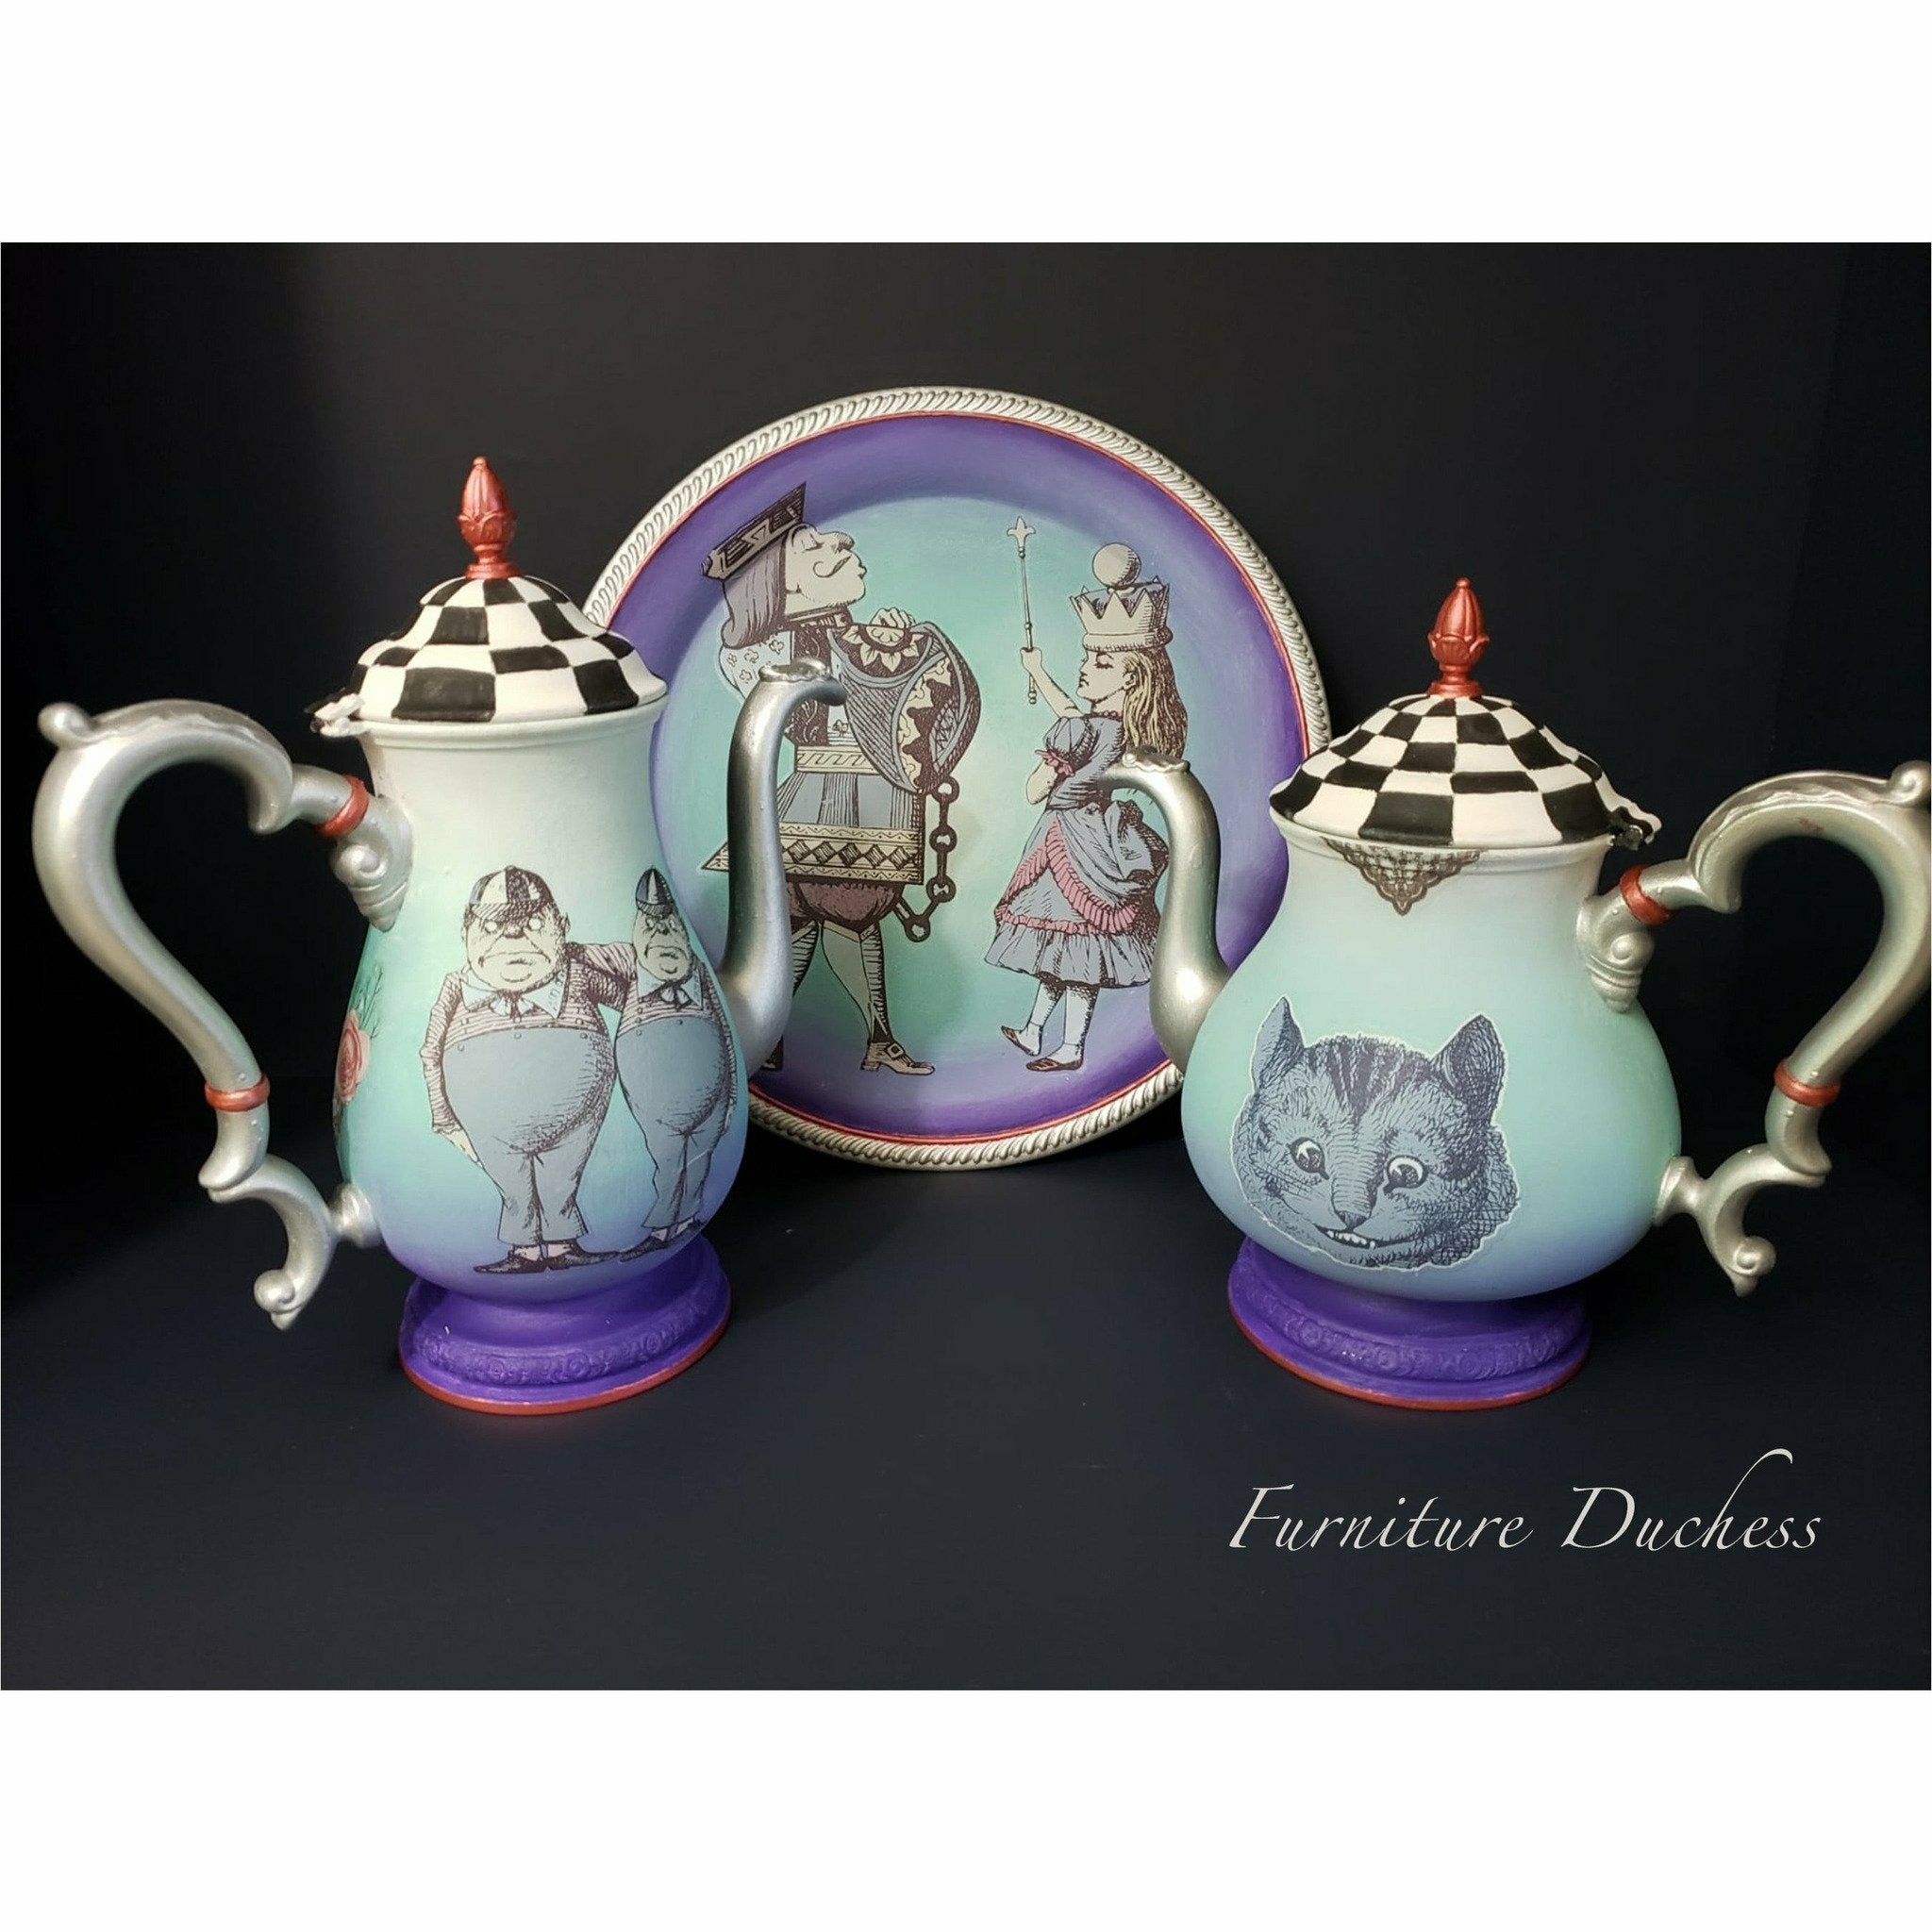 A teapot set on a black background including: plates and teapots. On the plate is Alice and Knave of hearts. On the teapot to the left is Tweedledum. On the teapot to the right is Cheshire cat. On the bottom right is a logo that reads: Furniture Duchess.